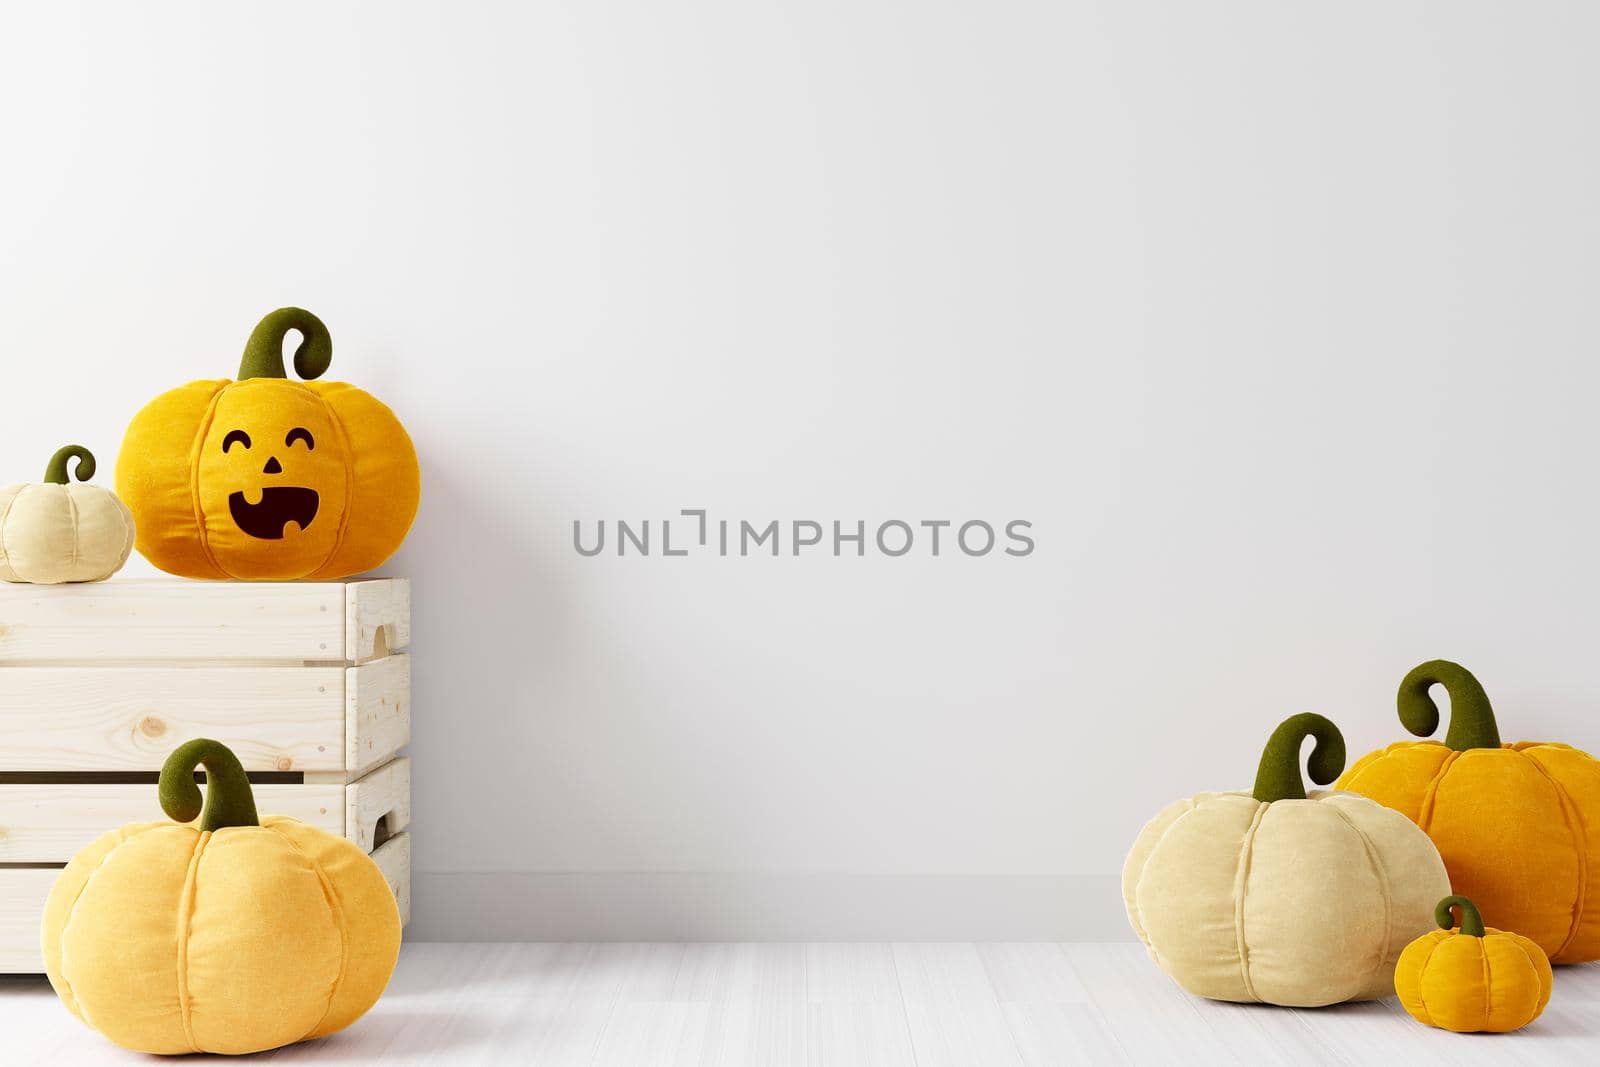 Halloween background copyspace with pumpkins on white background, smiling pumpkin face, wooden pallet, 3D rendering, Halloween theme with pumpkins on white background 3D illustration.